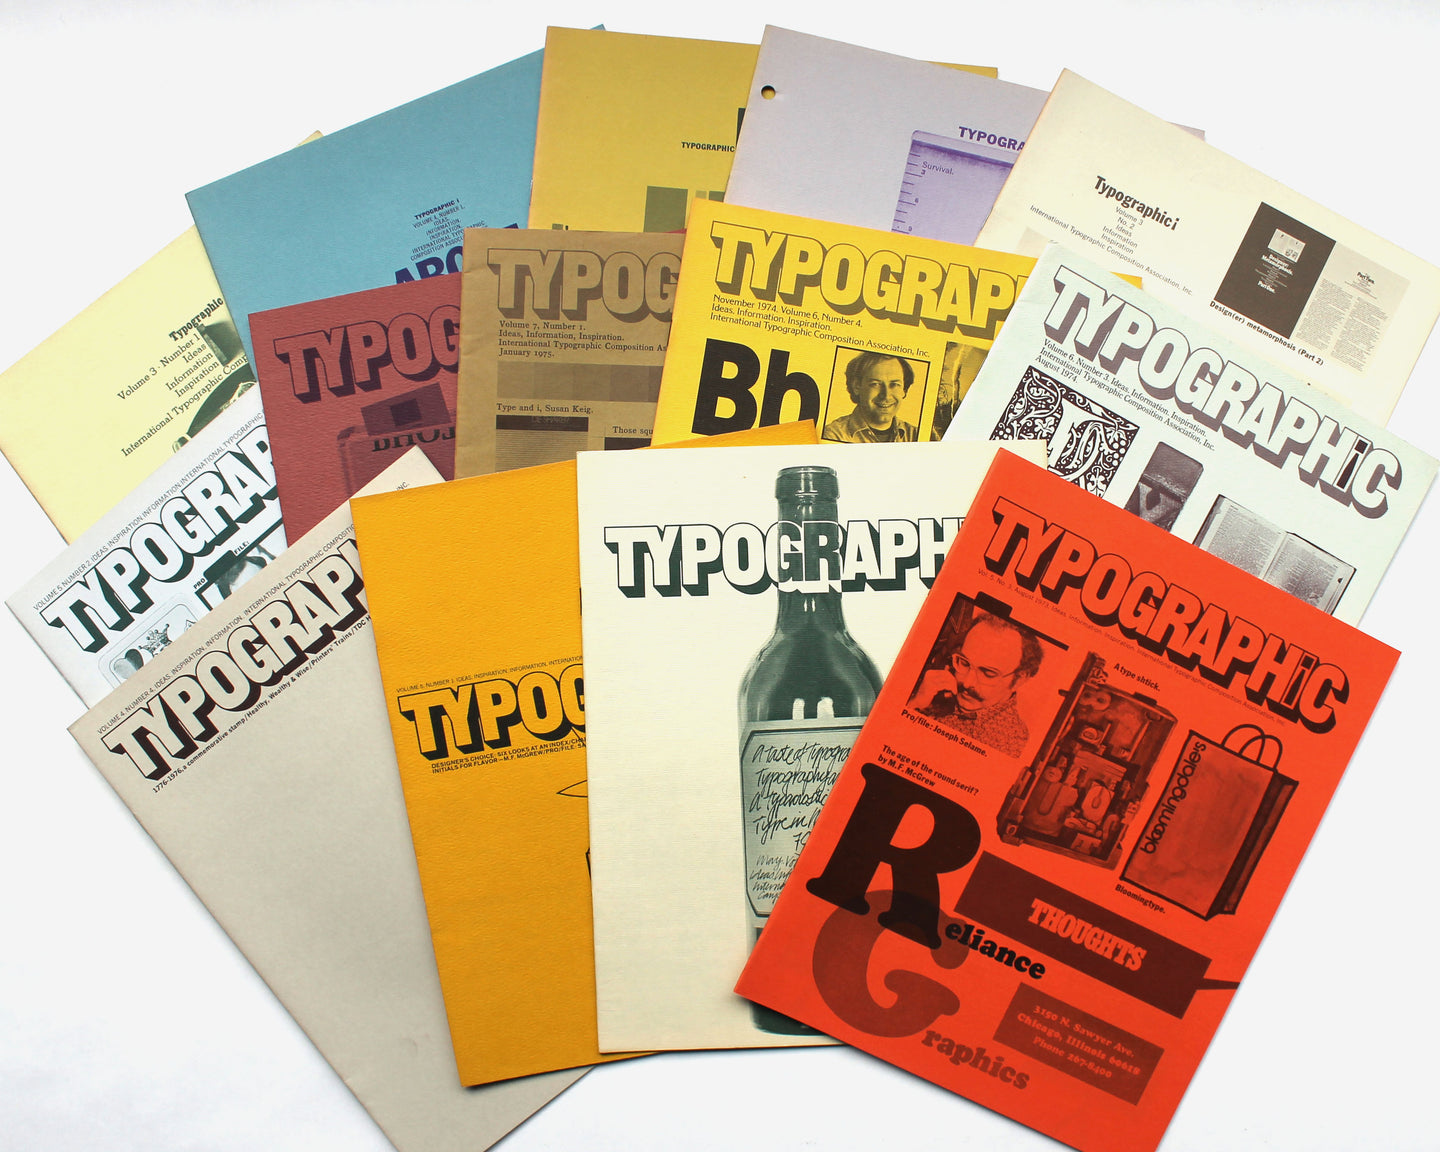 Typographic Journals by ITCA [Edward M. Gottschall and Mo Lebowitz]